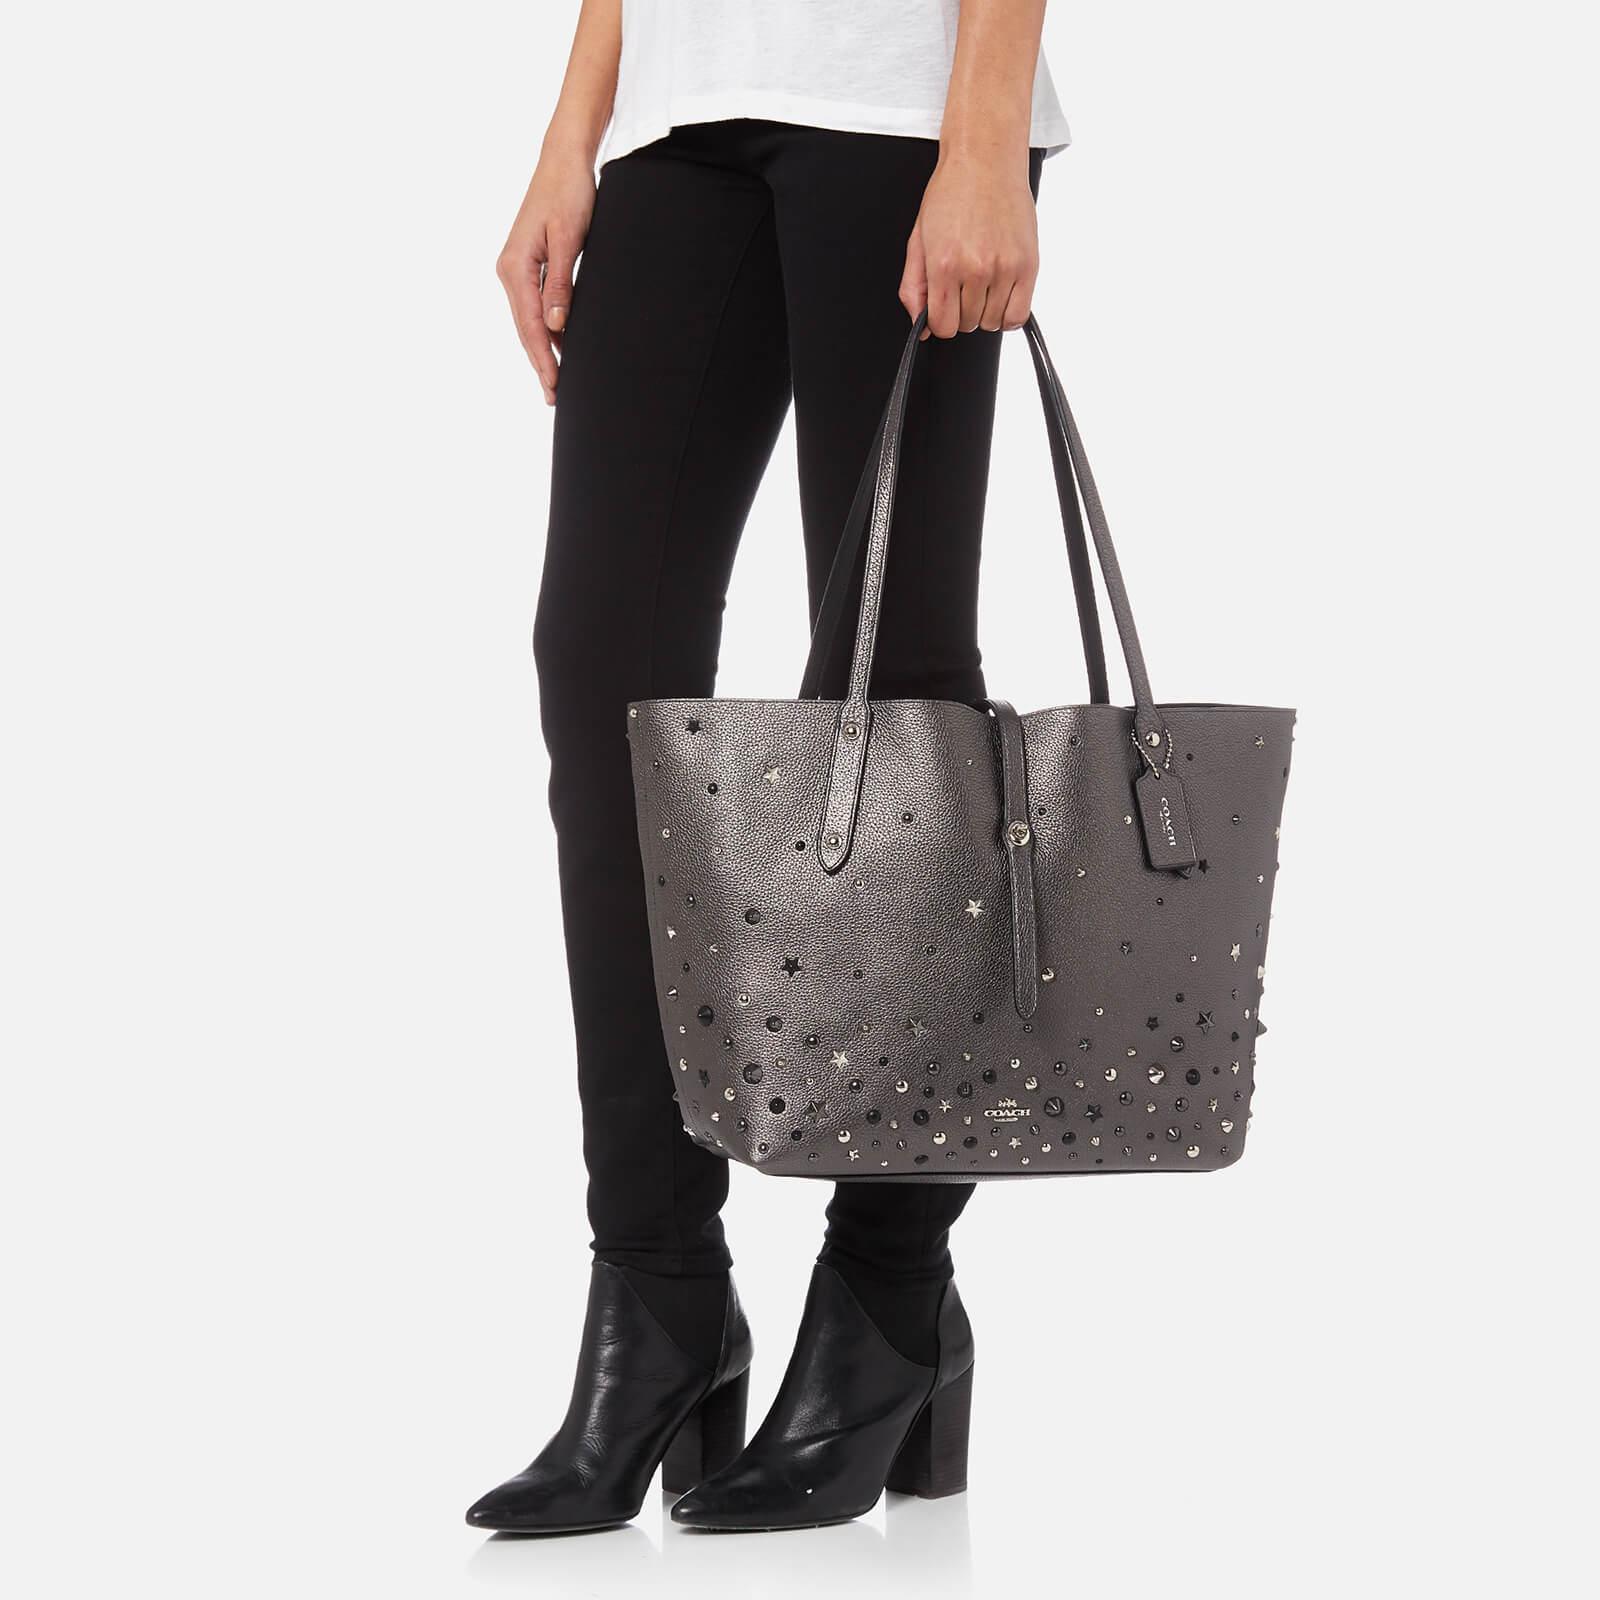 COACH Leather Market Tote Bag In Metallic With Star Rivets in Black - Lyst